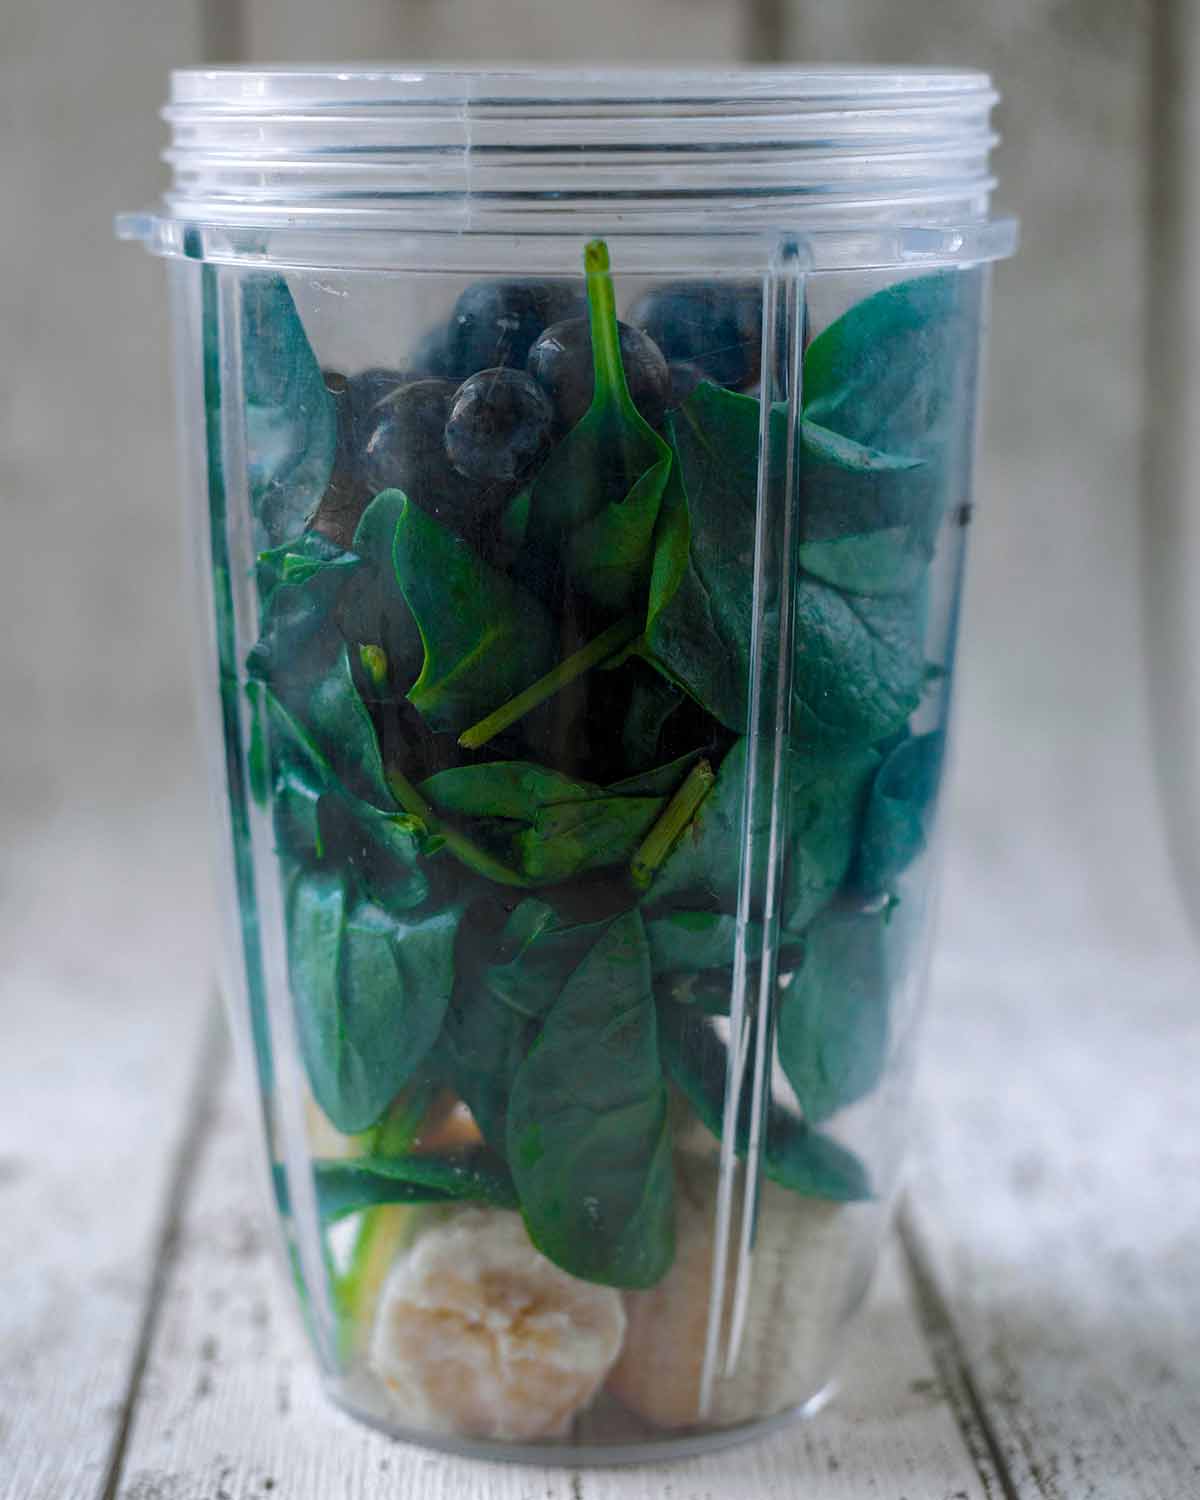 A blender jug containing banana, spinach leaves and blueberries.